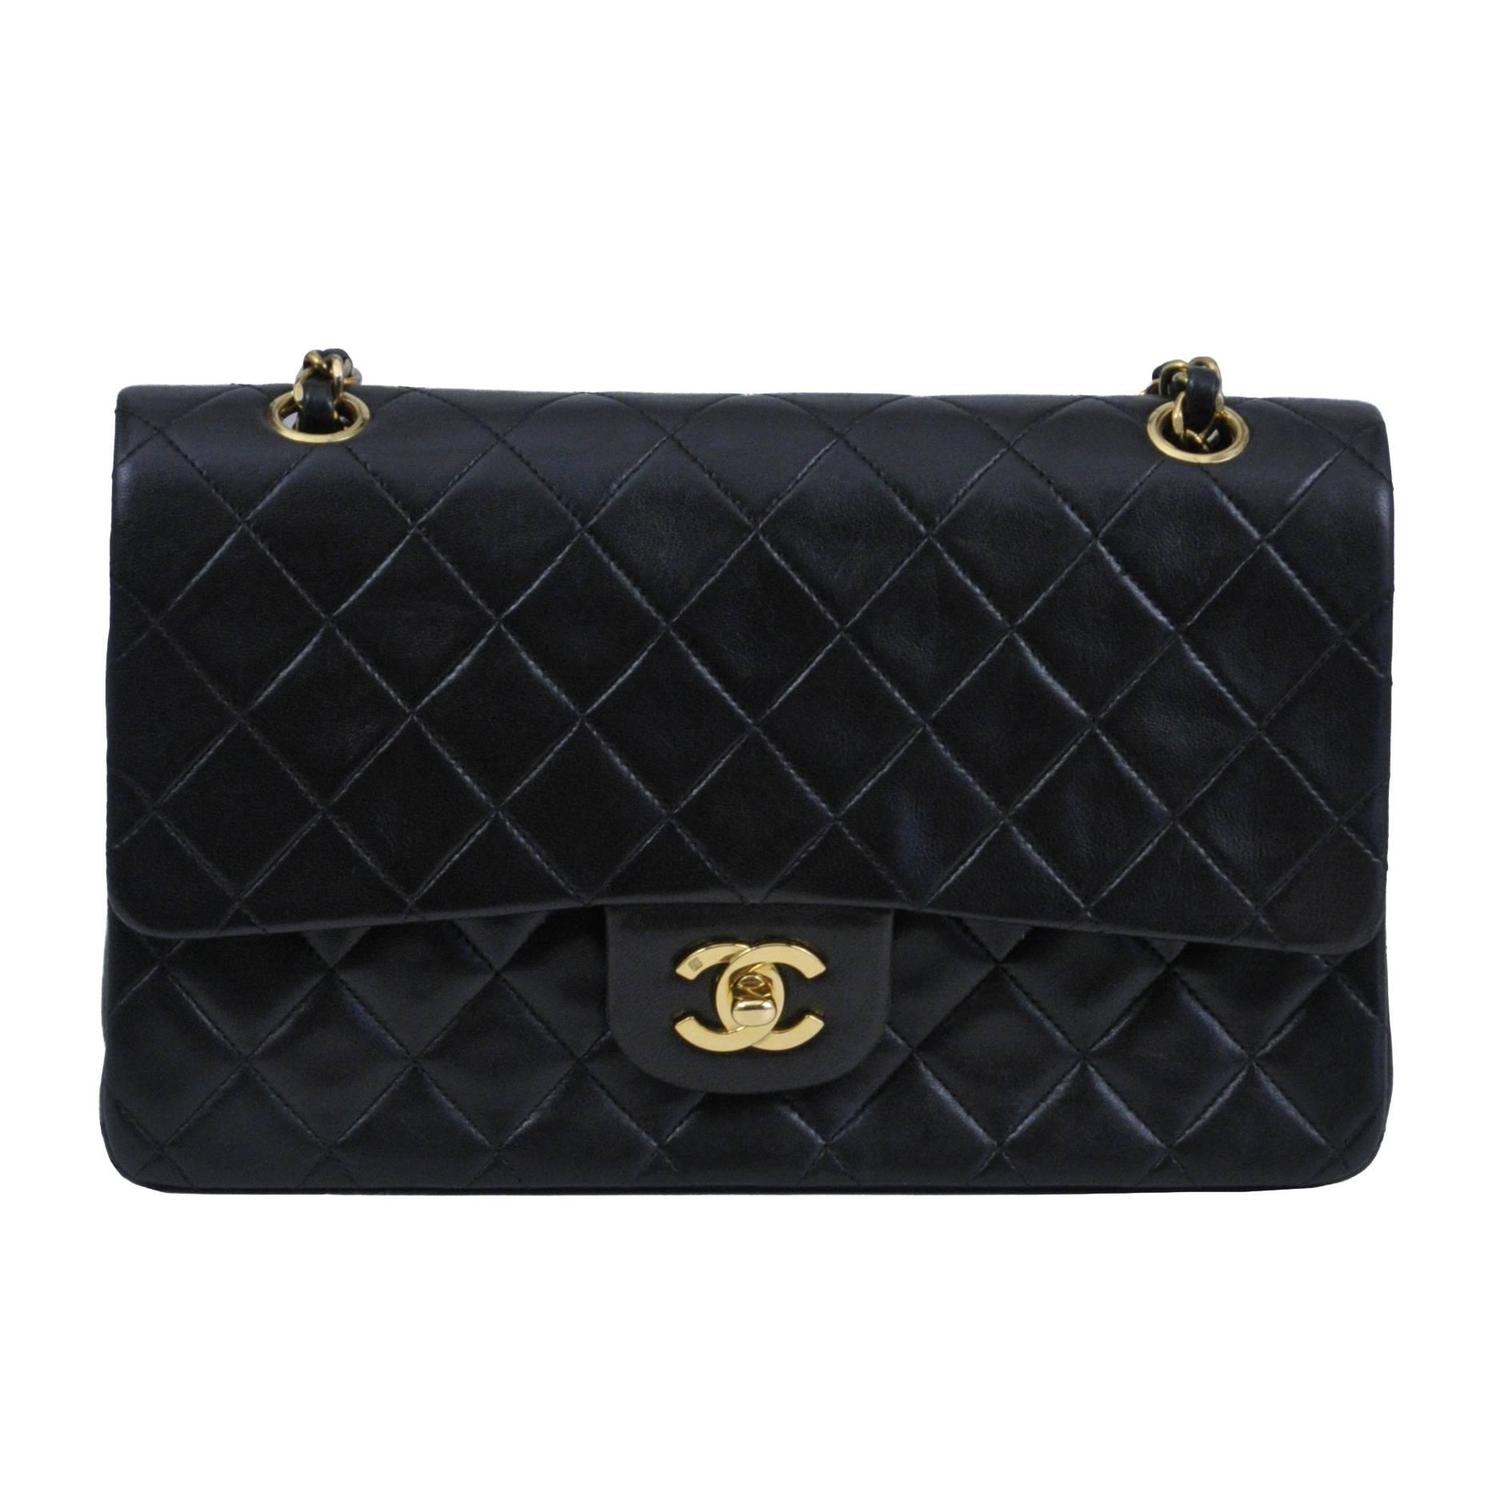 Chanel Classic 2.55 For Sale at 1stdibs